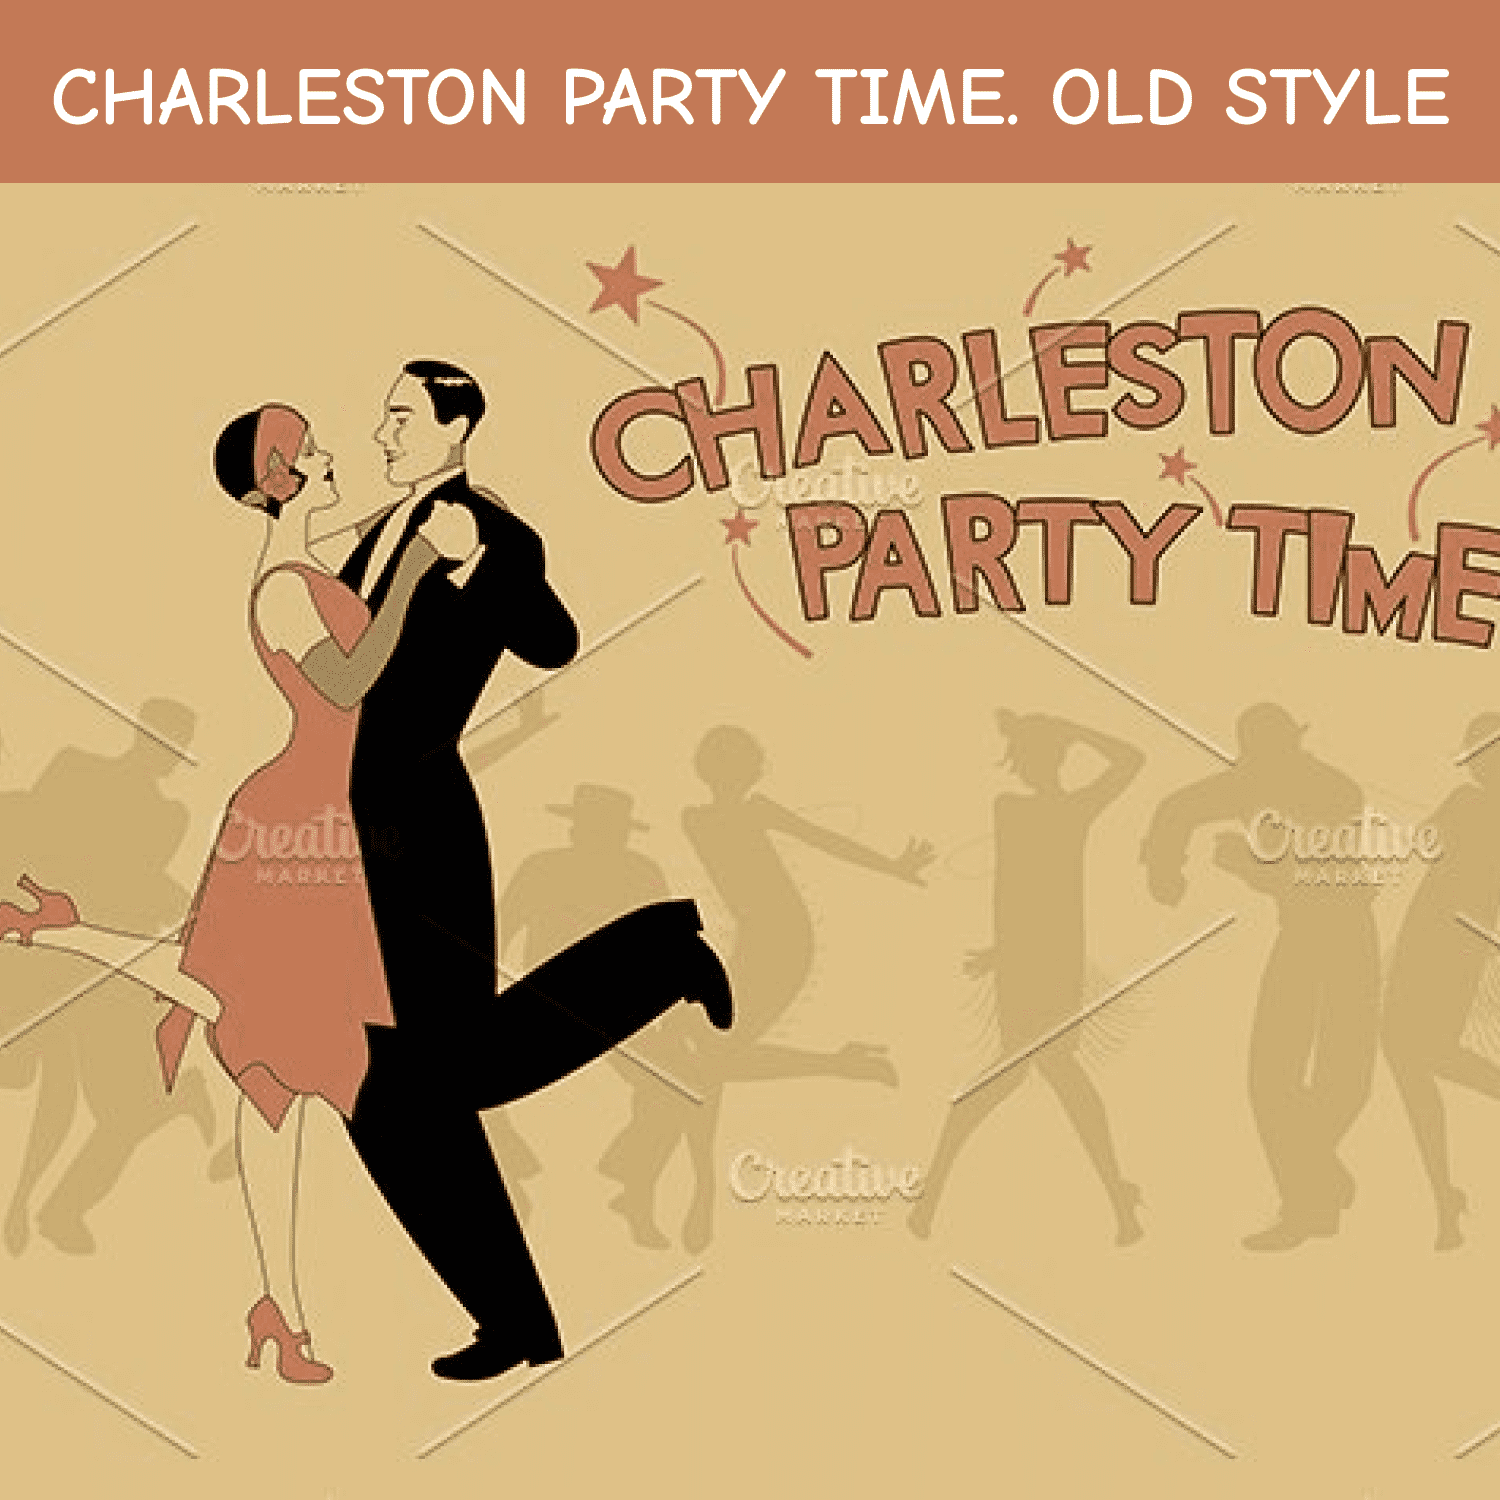 charleston party time. old style cover image.